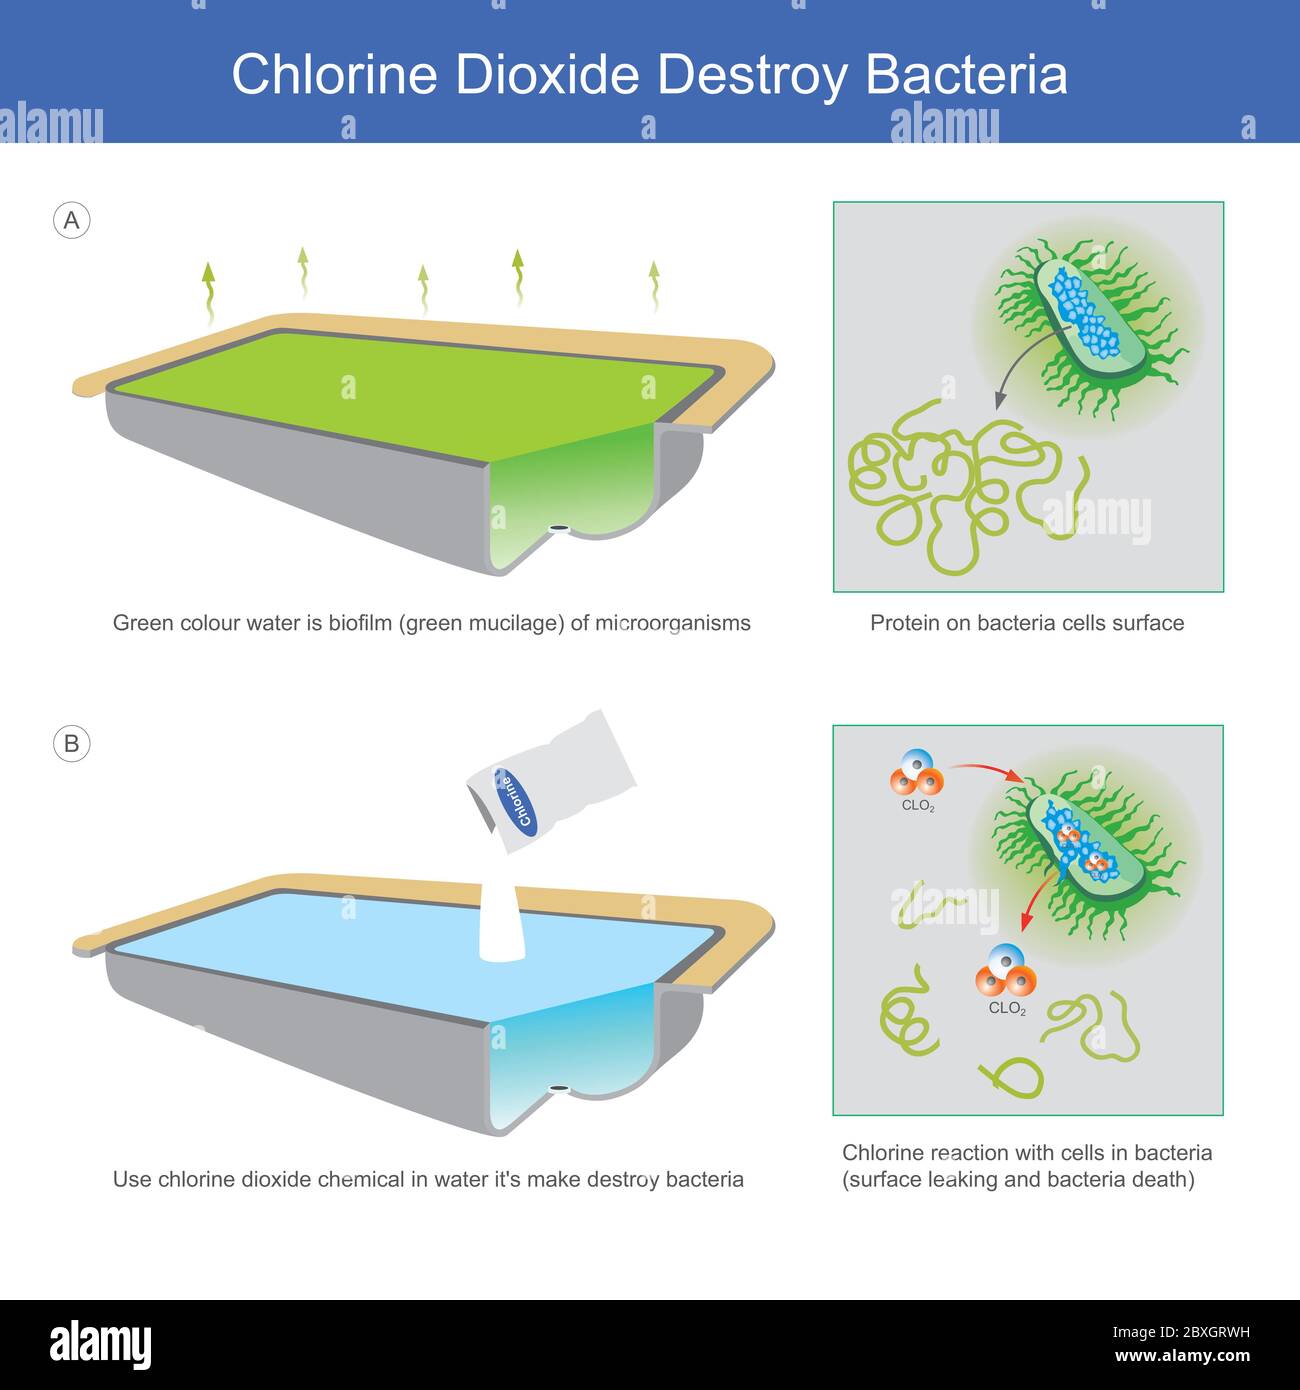 Chlorine Dioxide Destroy Bacteria. Illustration explain water sources in which bacteria mucilage until all green colour water Stock Vector